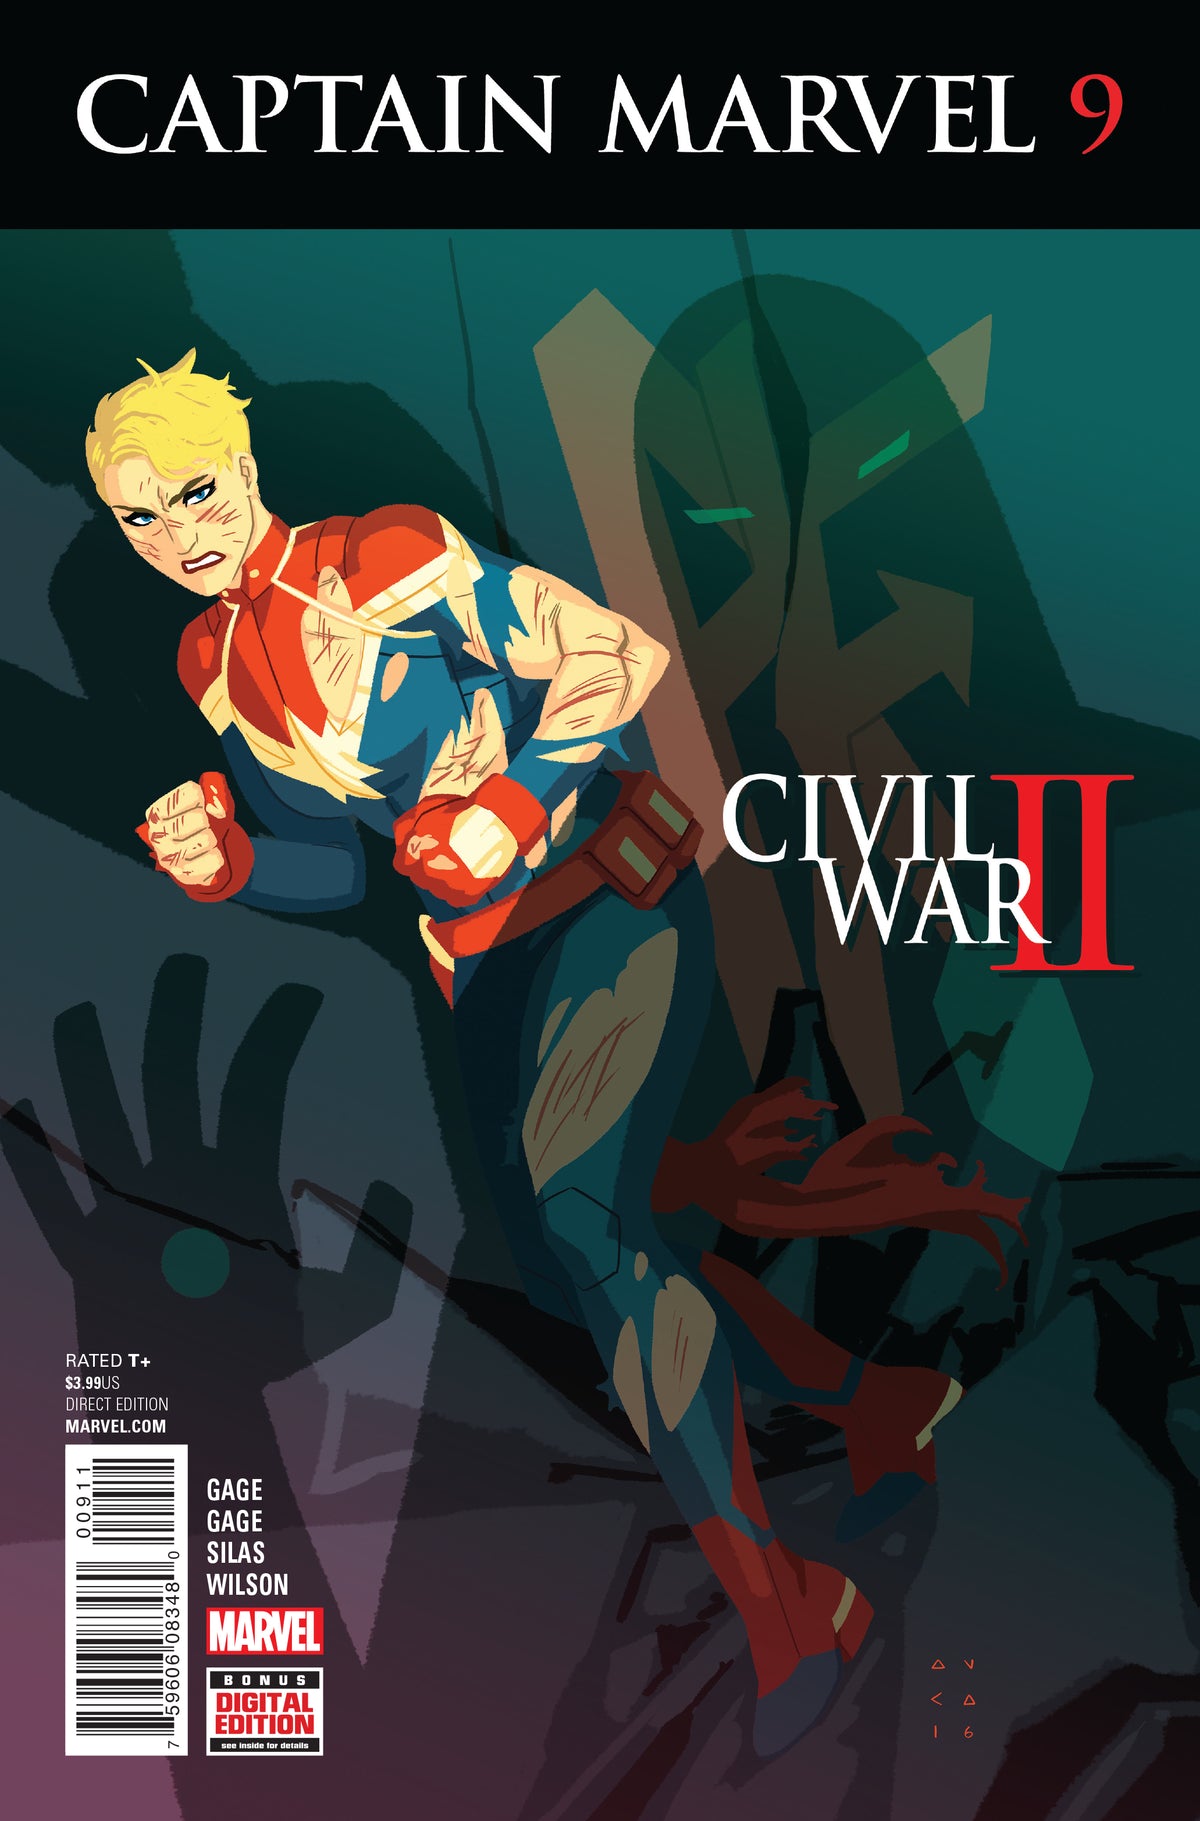 Photo of Captain Marvel Issue 9 Cw2 comic sold by Stronghold Collectibles